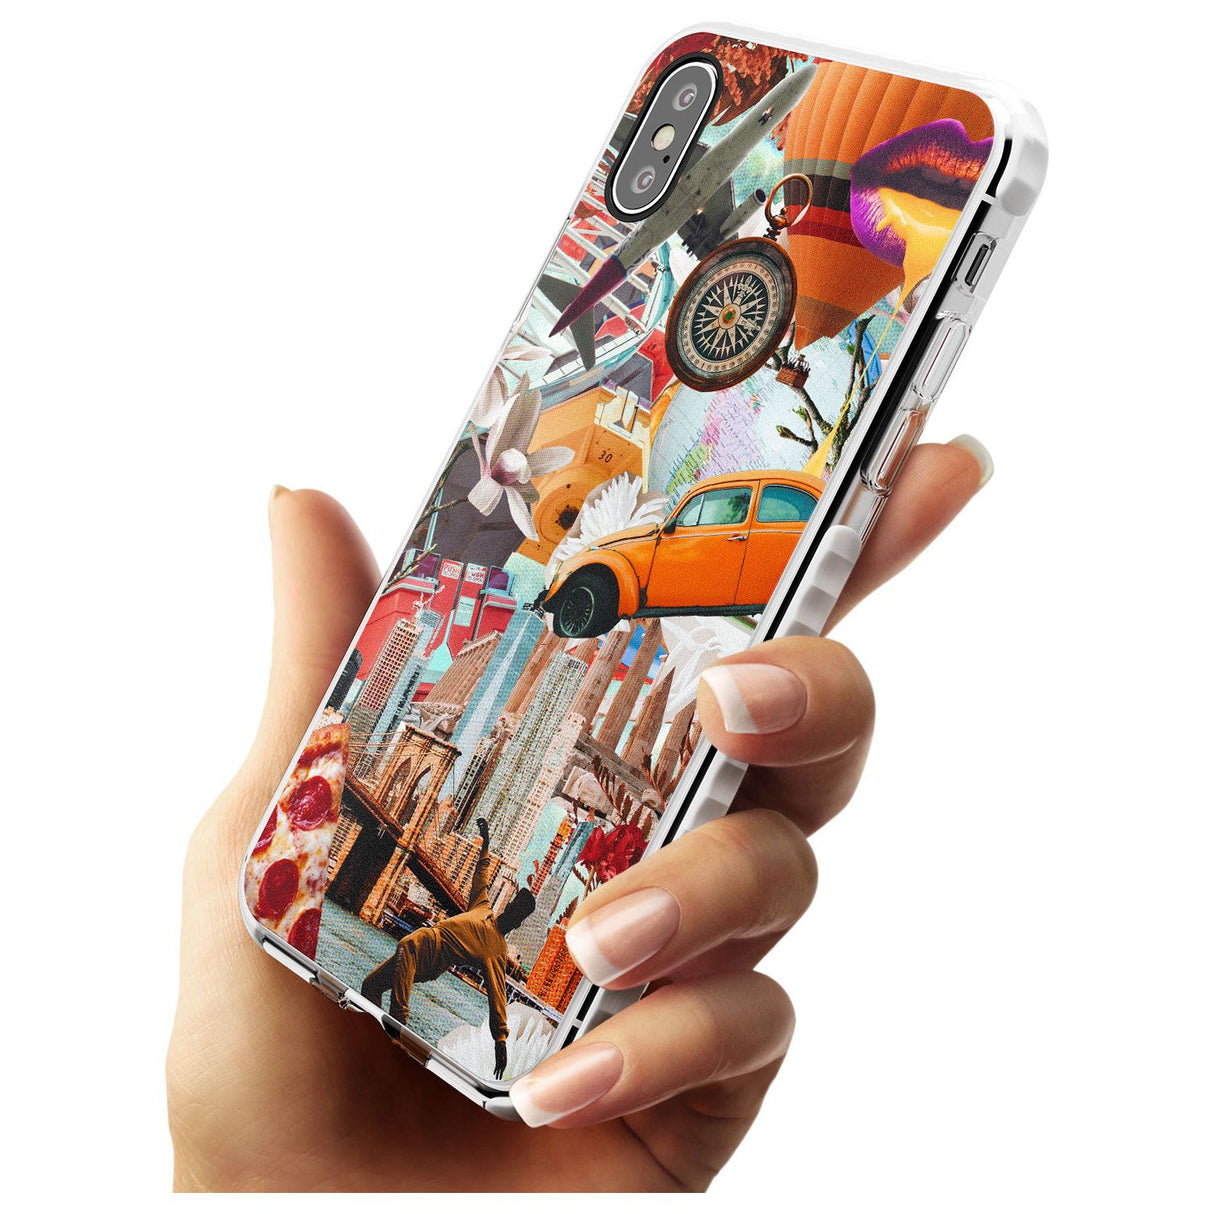 Vintage Collage: New York Mix Impact Phone Case for iPhone X XS Max XR